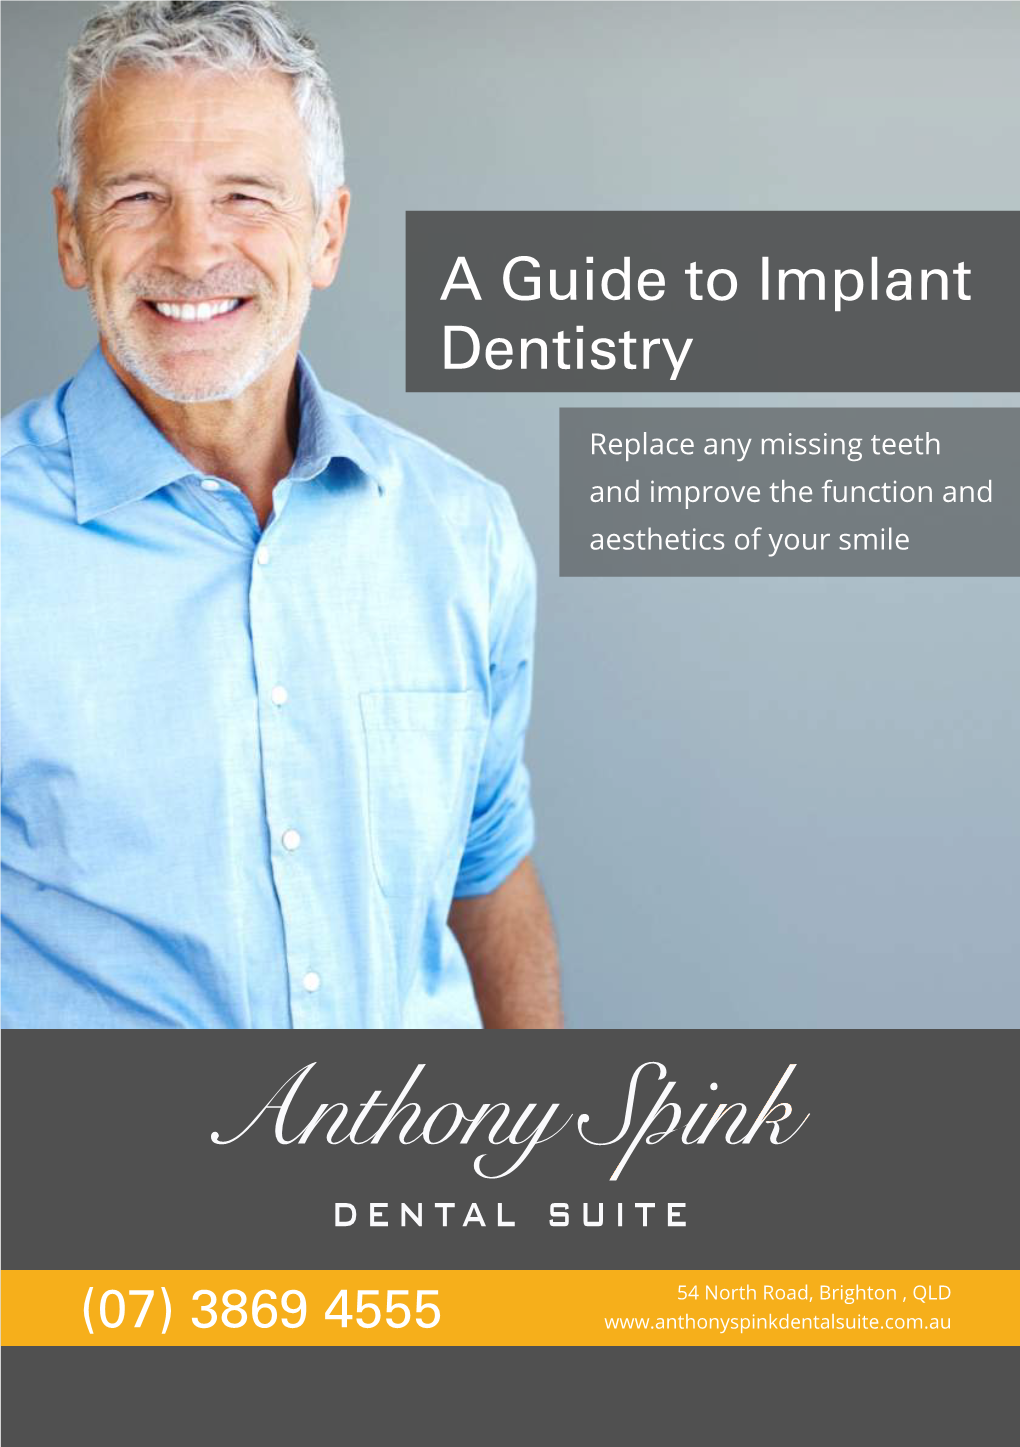 A Guide to Implant Dentistry